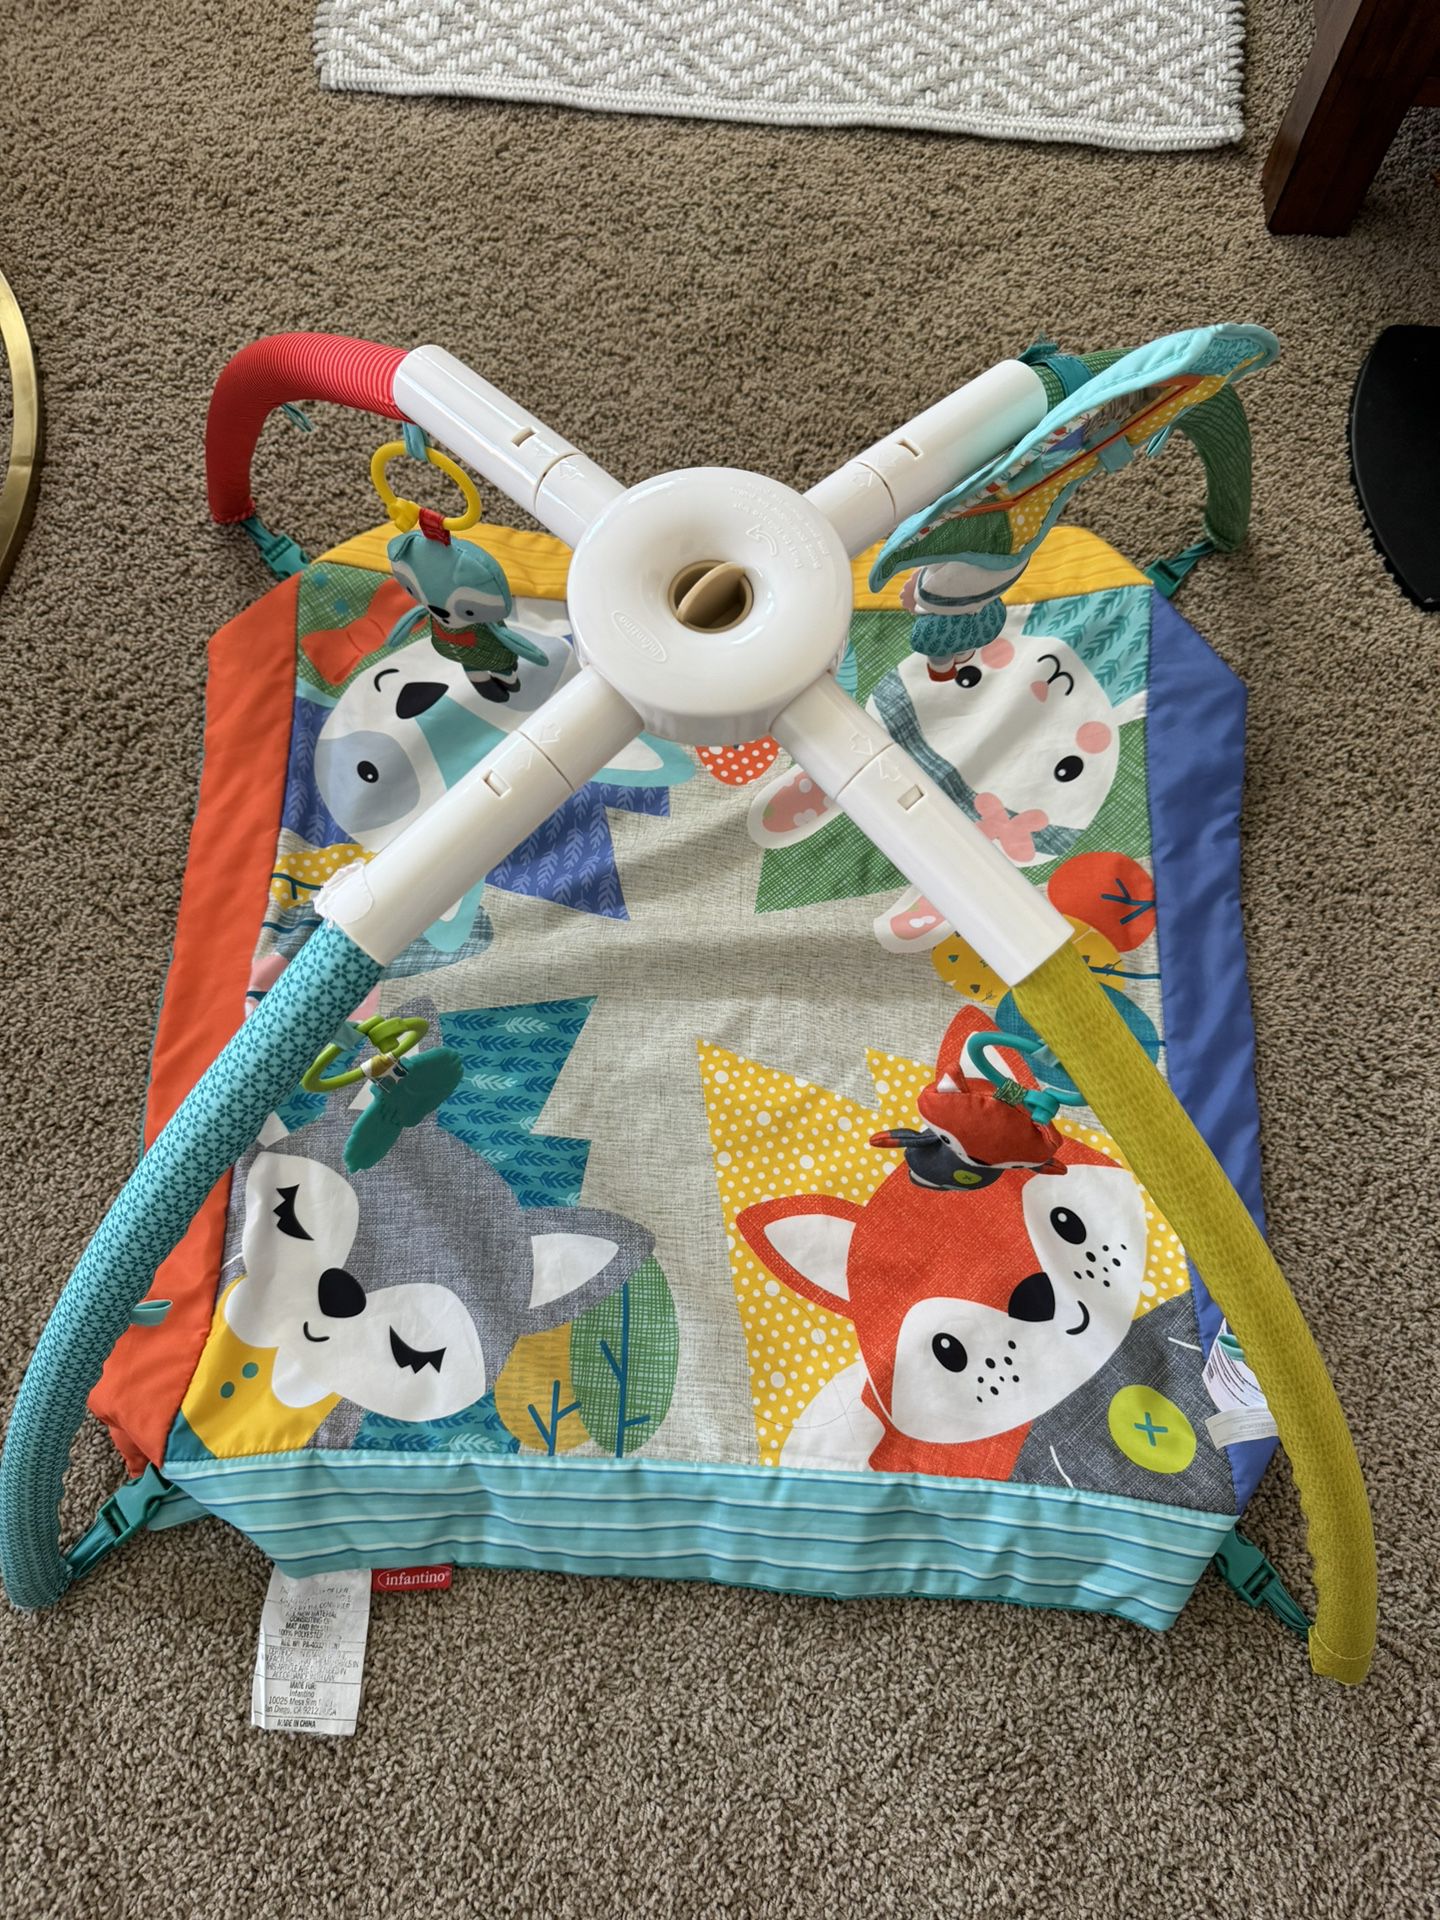 Infant Play Gym With Mirror And Toys